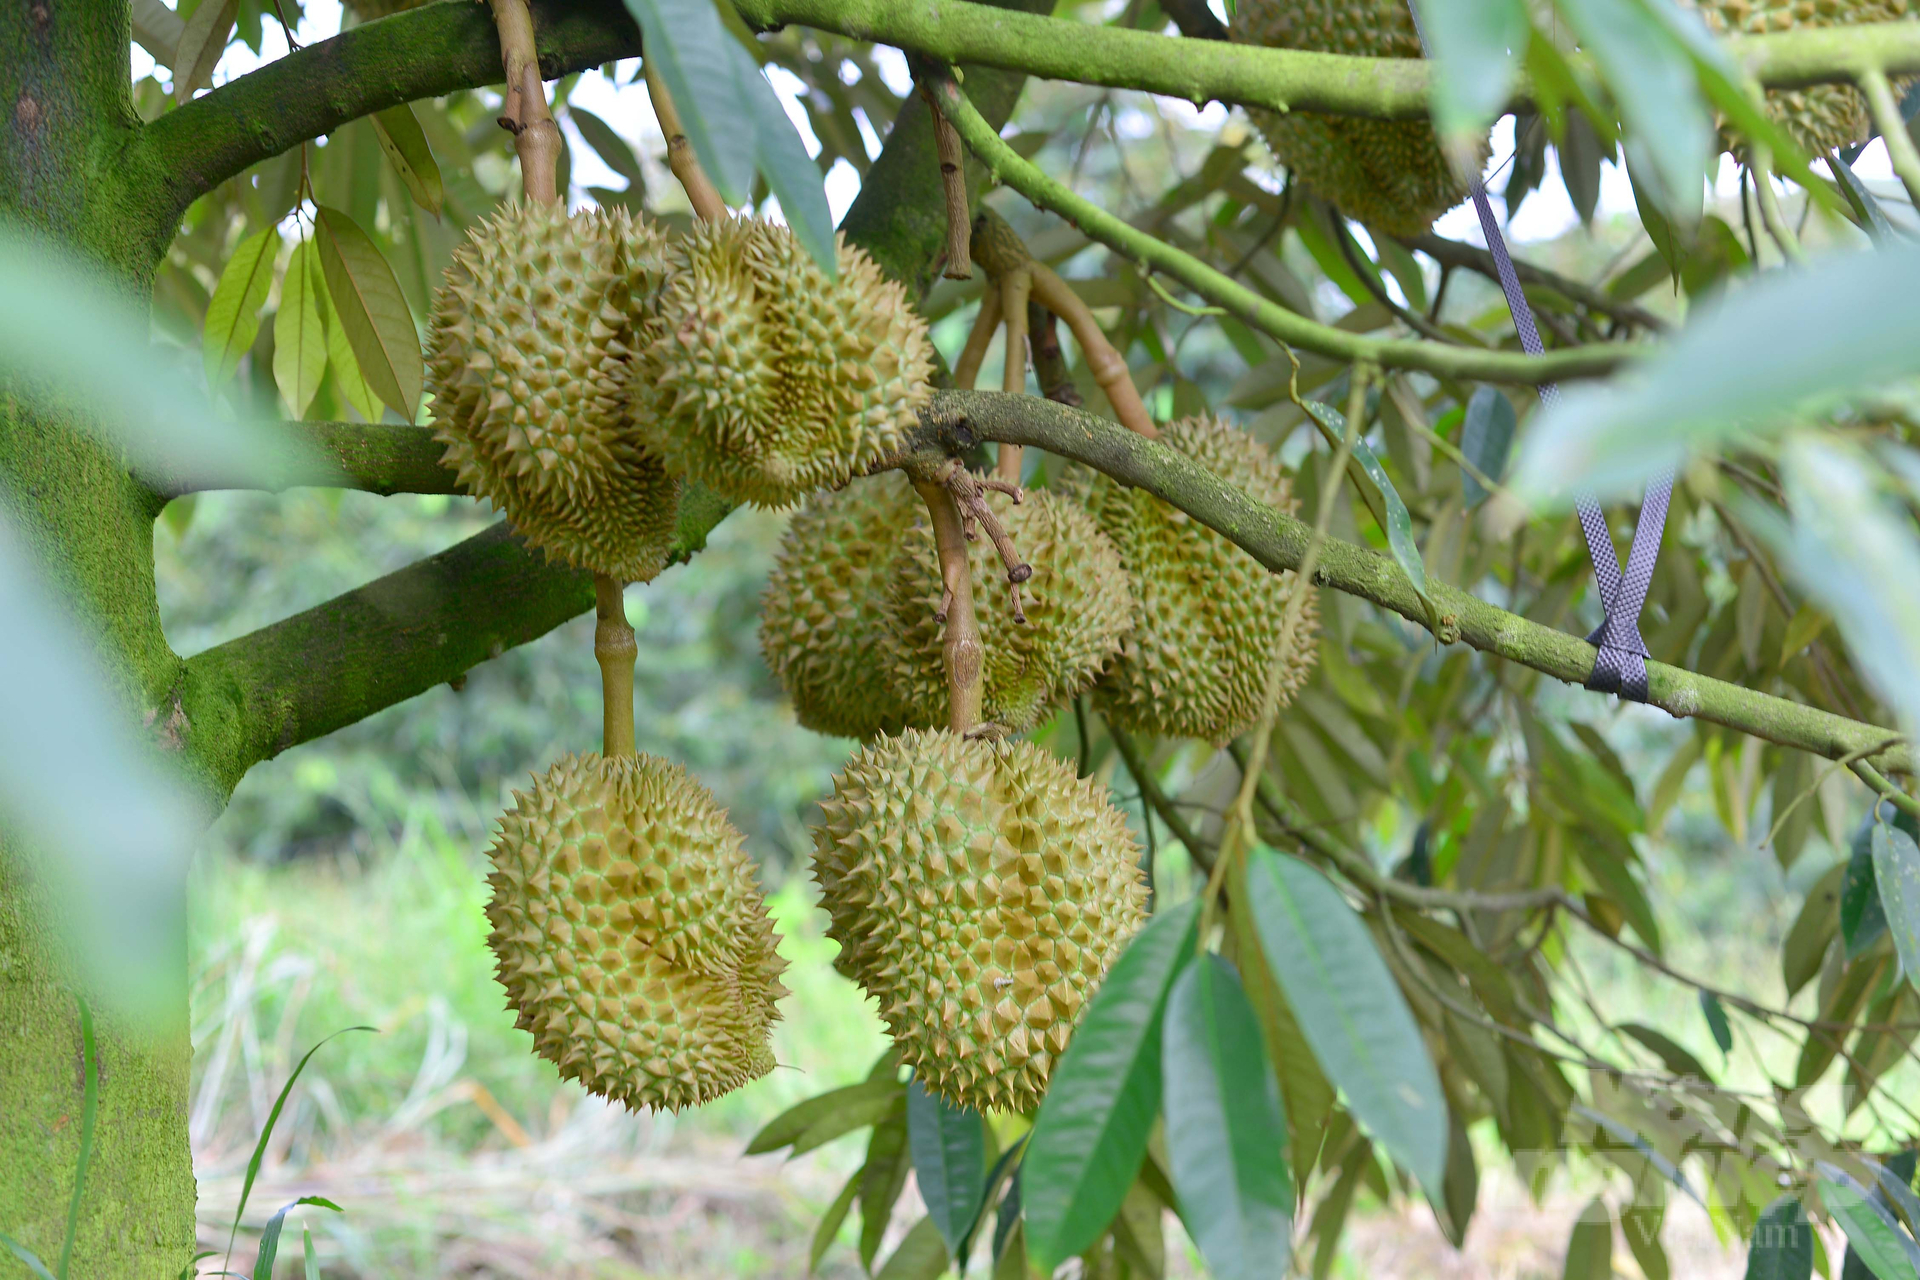 The total durian production of Dam Rong district is currently over 4,300 tons. Photo: Minh Hau.